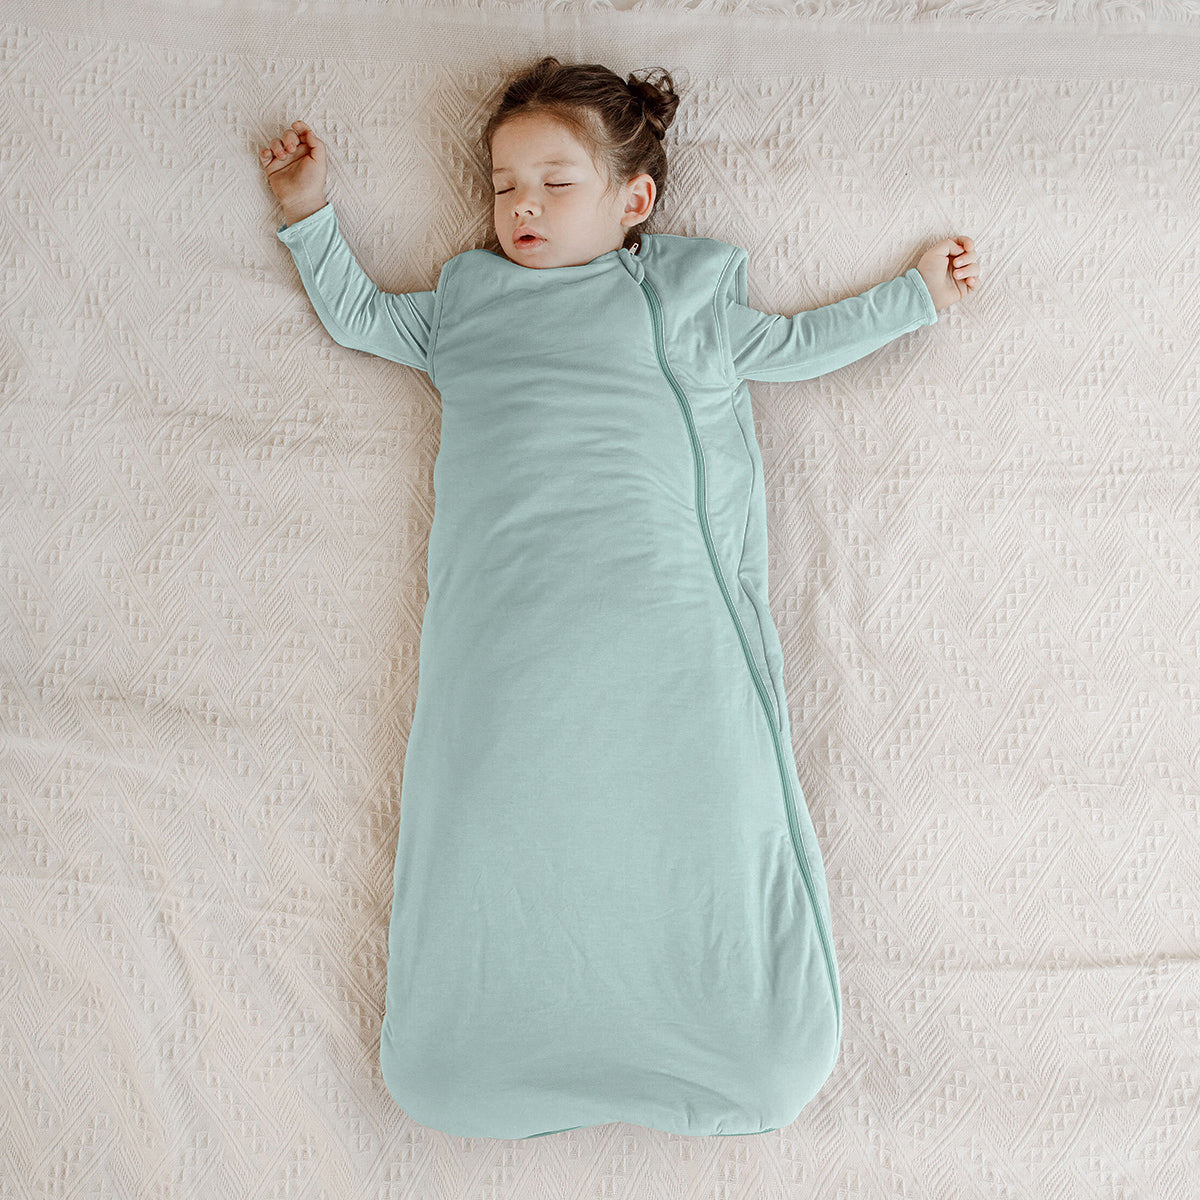 Baby Bamboo Quilted Sleeveless Sleep Sack TOG 1.0 - Mint Green